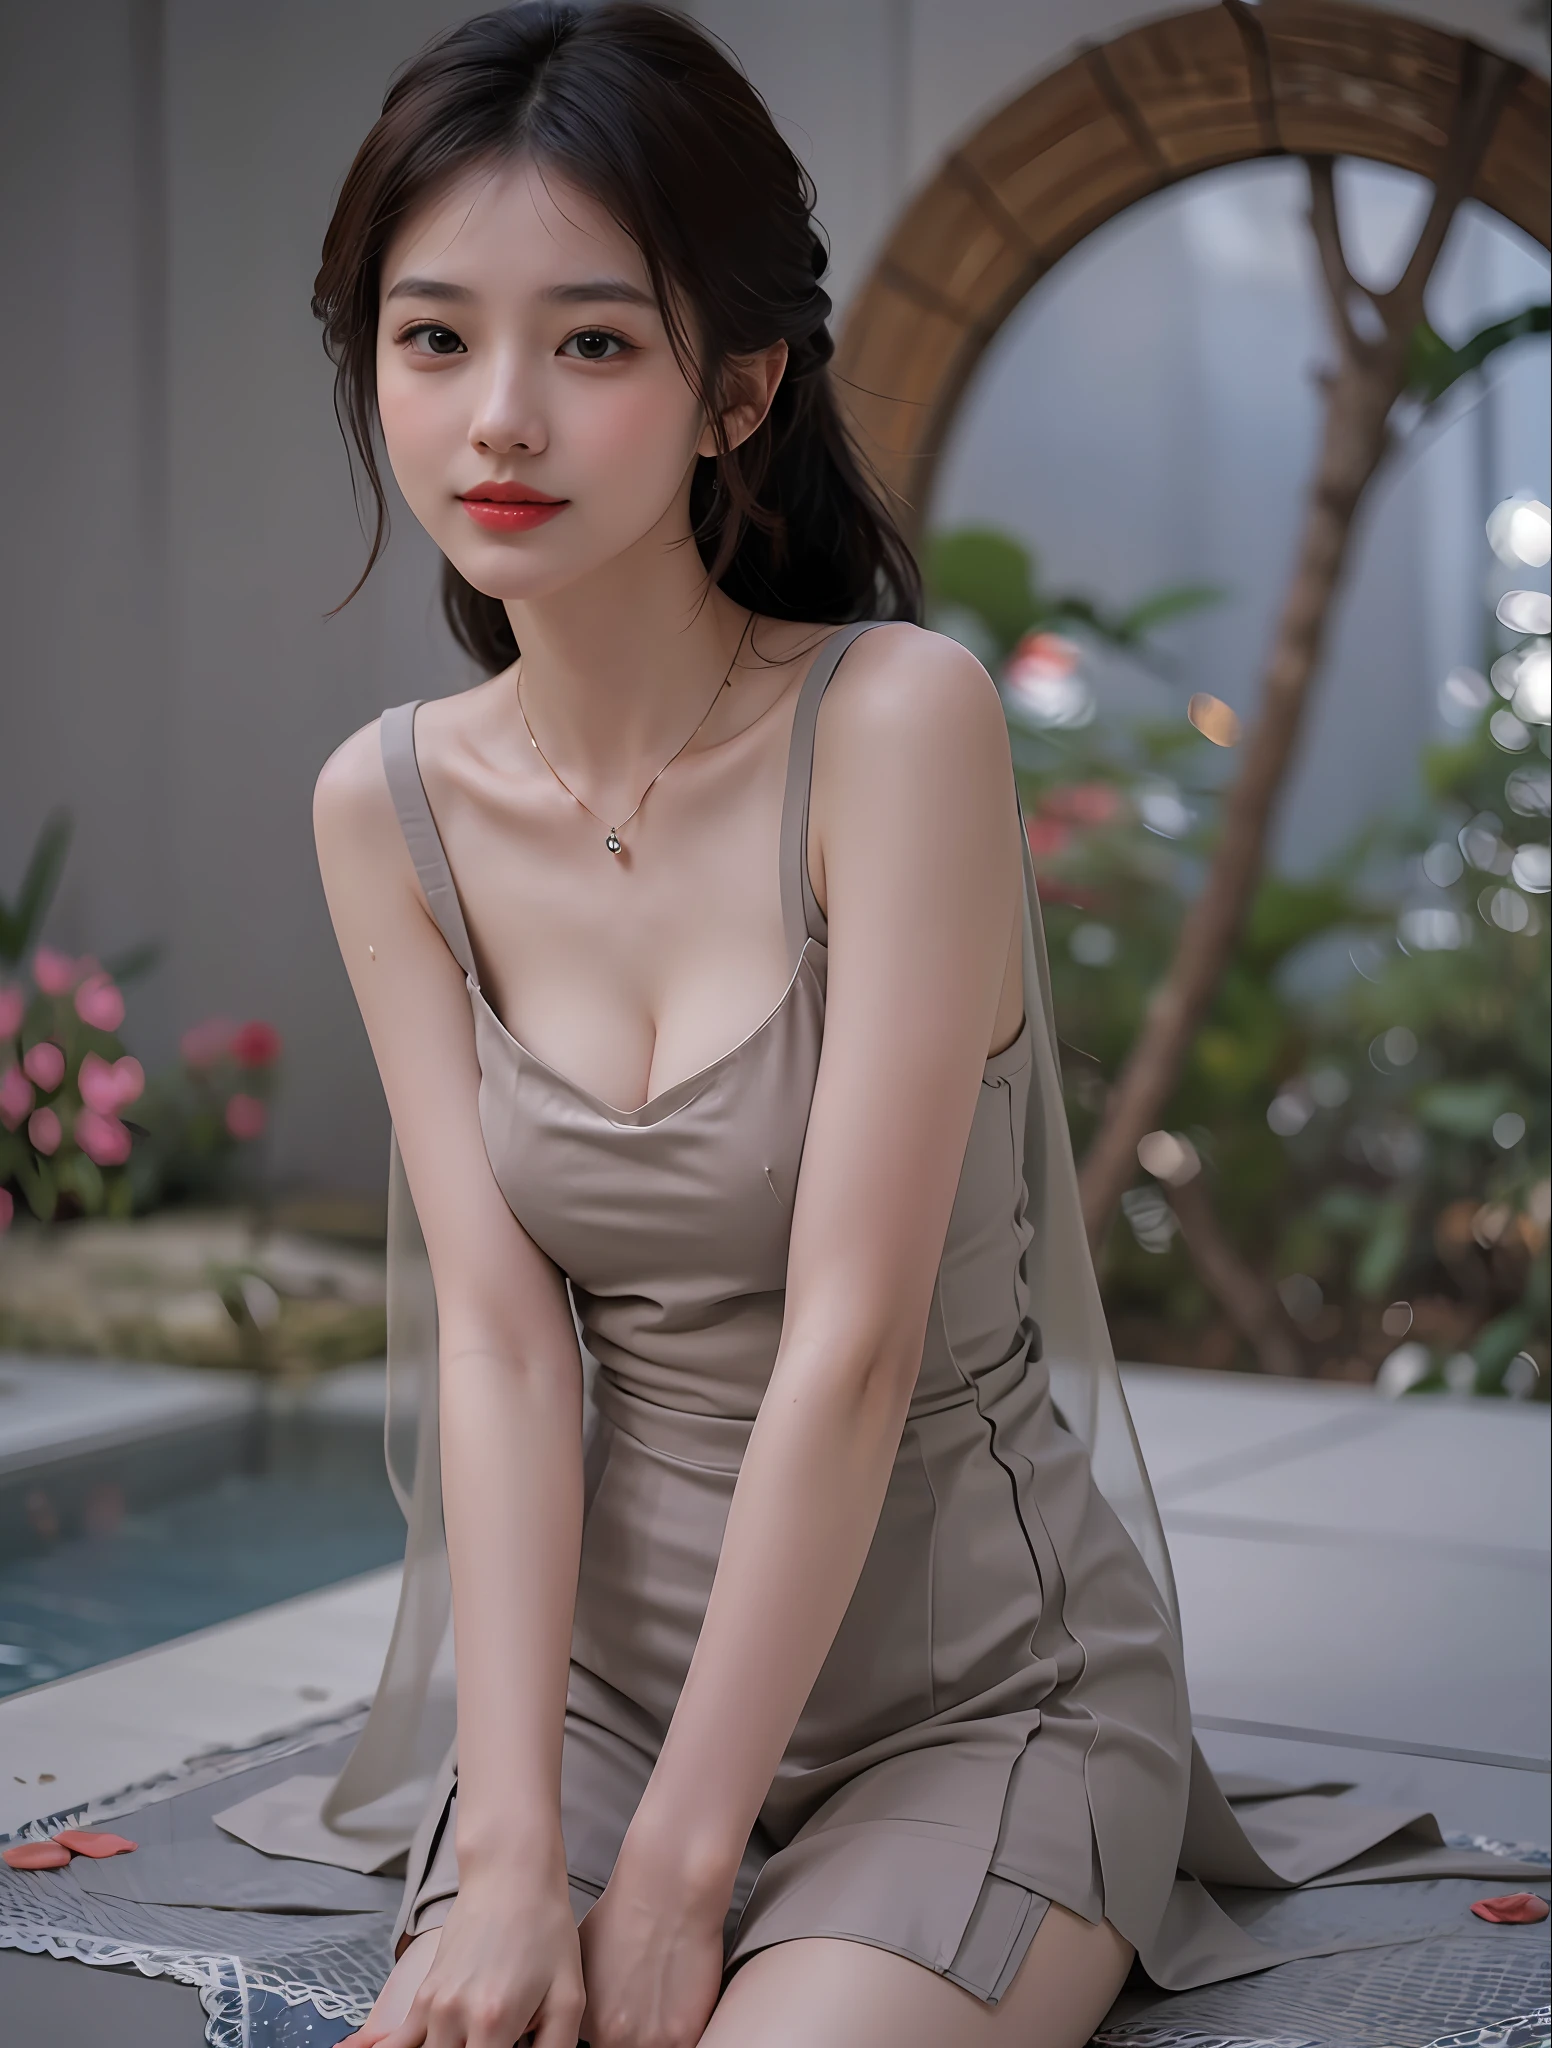 (Highly detailed CG unity 8k wallpaper), (Masterpiece), (Best quality), (Super detail), (best illustration), (Best shadow), (Photorealistic:1.1),(pureerosface_v1:0.5),(Taiwanese cute girl),(Taiwanese Sexy Woman),,Real human skin, Lens flare, shade, Backlight,Lotus pond，Under the lotus，Under the lotus leaves，(Depth of field),(Natural light), filmgrain,((A girl with))),hyper HD,(Detailed eyes:1.4),Brown eyes, Seductive smile,kawaii,(solofocus),(Black hair),((Princess Cut Long Hair, Low Braided Ponytail))(Chinese hair accessories)))(See-Through Grey Hansou),(See-Through Gray Chinese Tan Costume Cloak)))((( Huge and drooping breasts)), (((Cowboy shot)), (Close-up) Blurred background, 18 years old, (((独奏)), (Shiny skin), cutea, wearing a diamond necklace, (watch audience), (Look at the front), (smile512:0.1), (Night), (Big)), (nomake-up), , (wet), (full of sweat), with her mouth open, (squinting: 0.5), (Pubic Area Showing), ((Small areolas)),